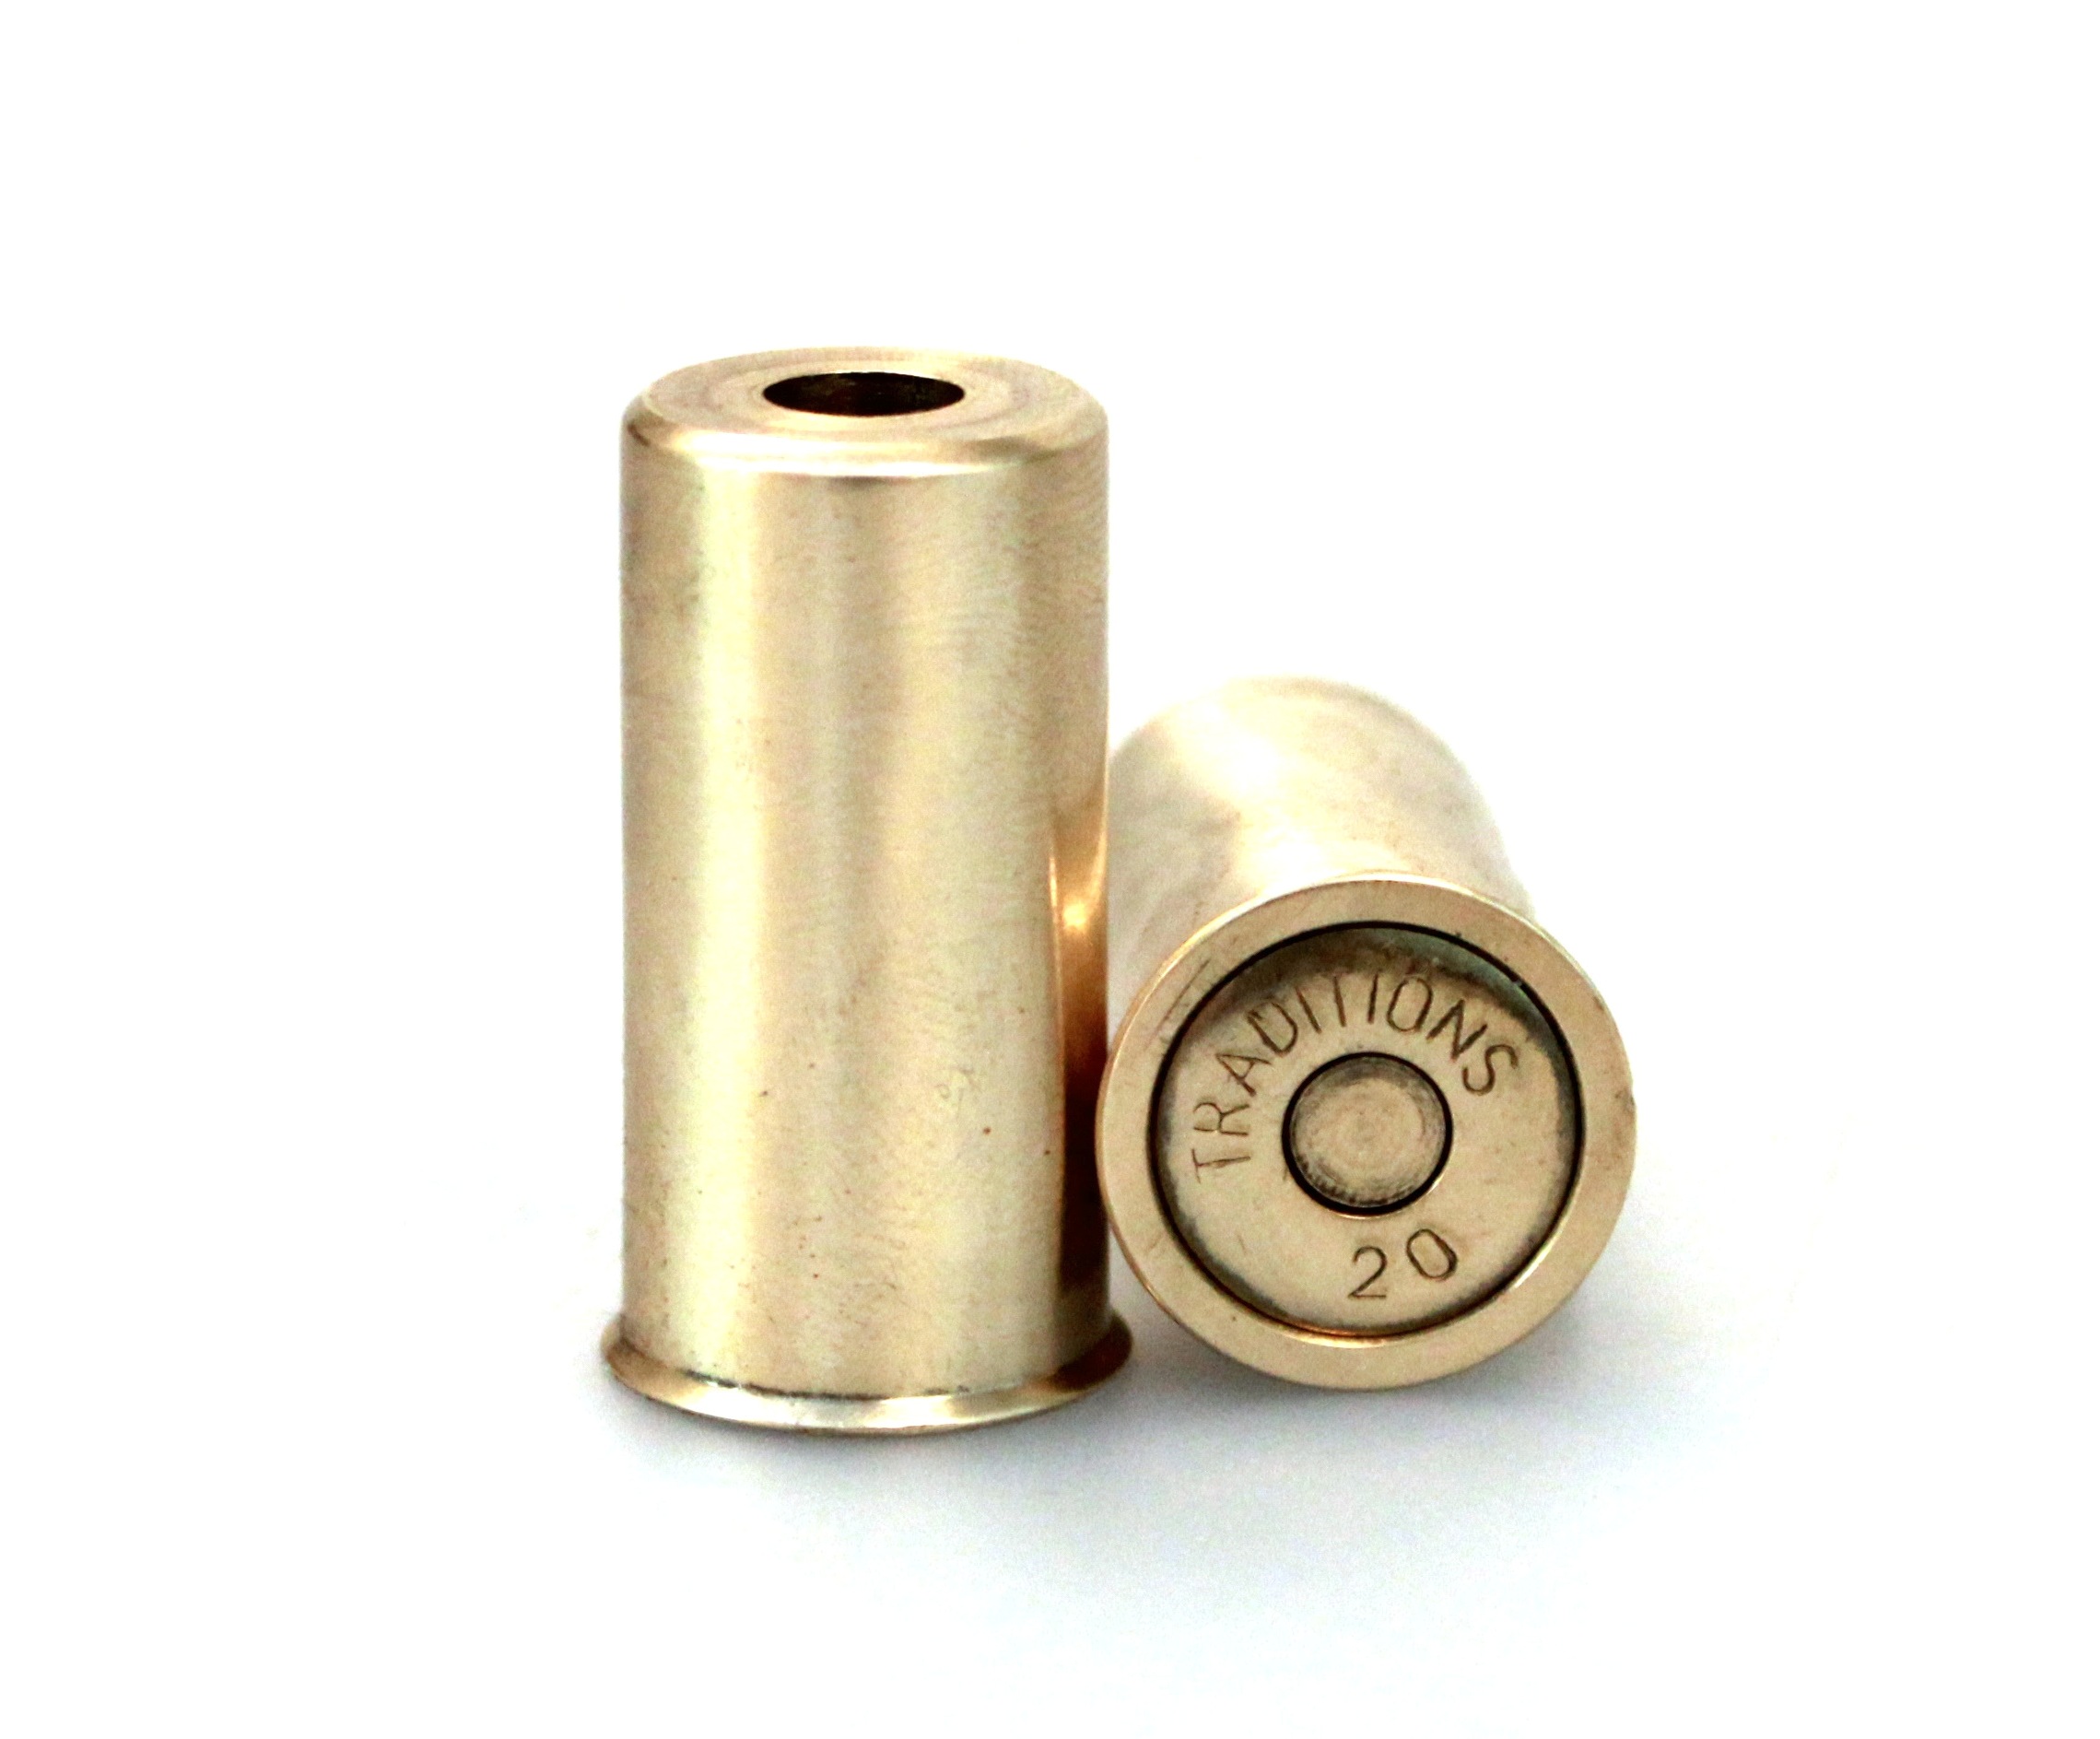 Traditions Snap Caps Solid Brass .12 Gauge Pack of 2  # ASGB12  New! 